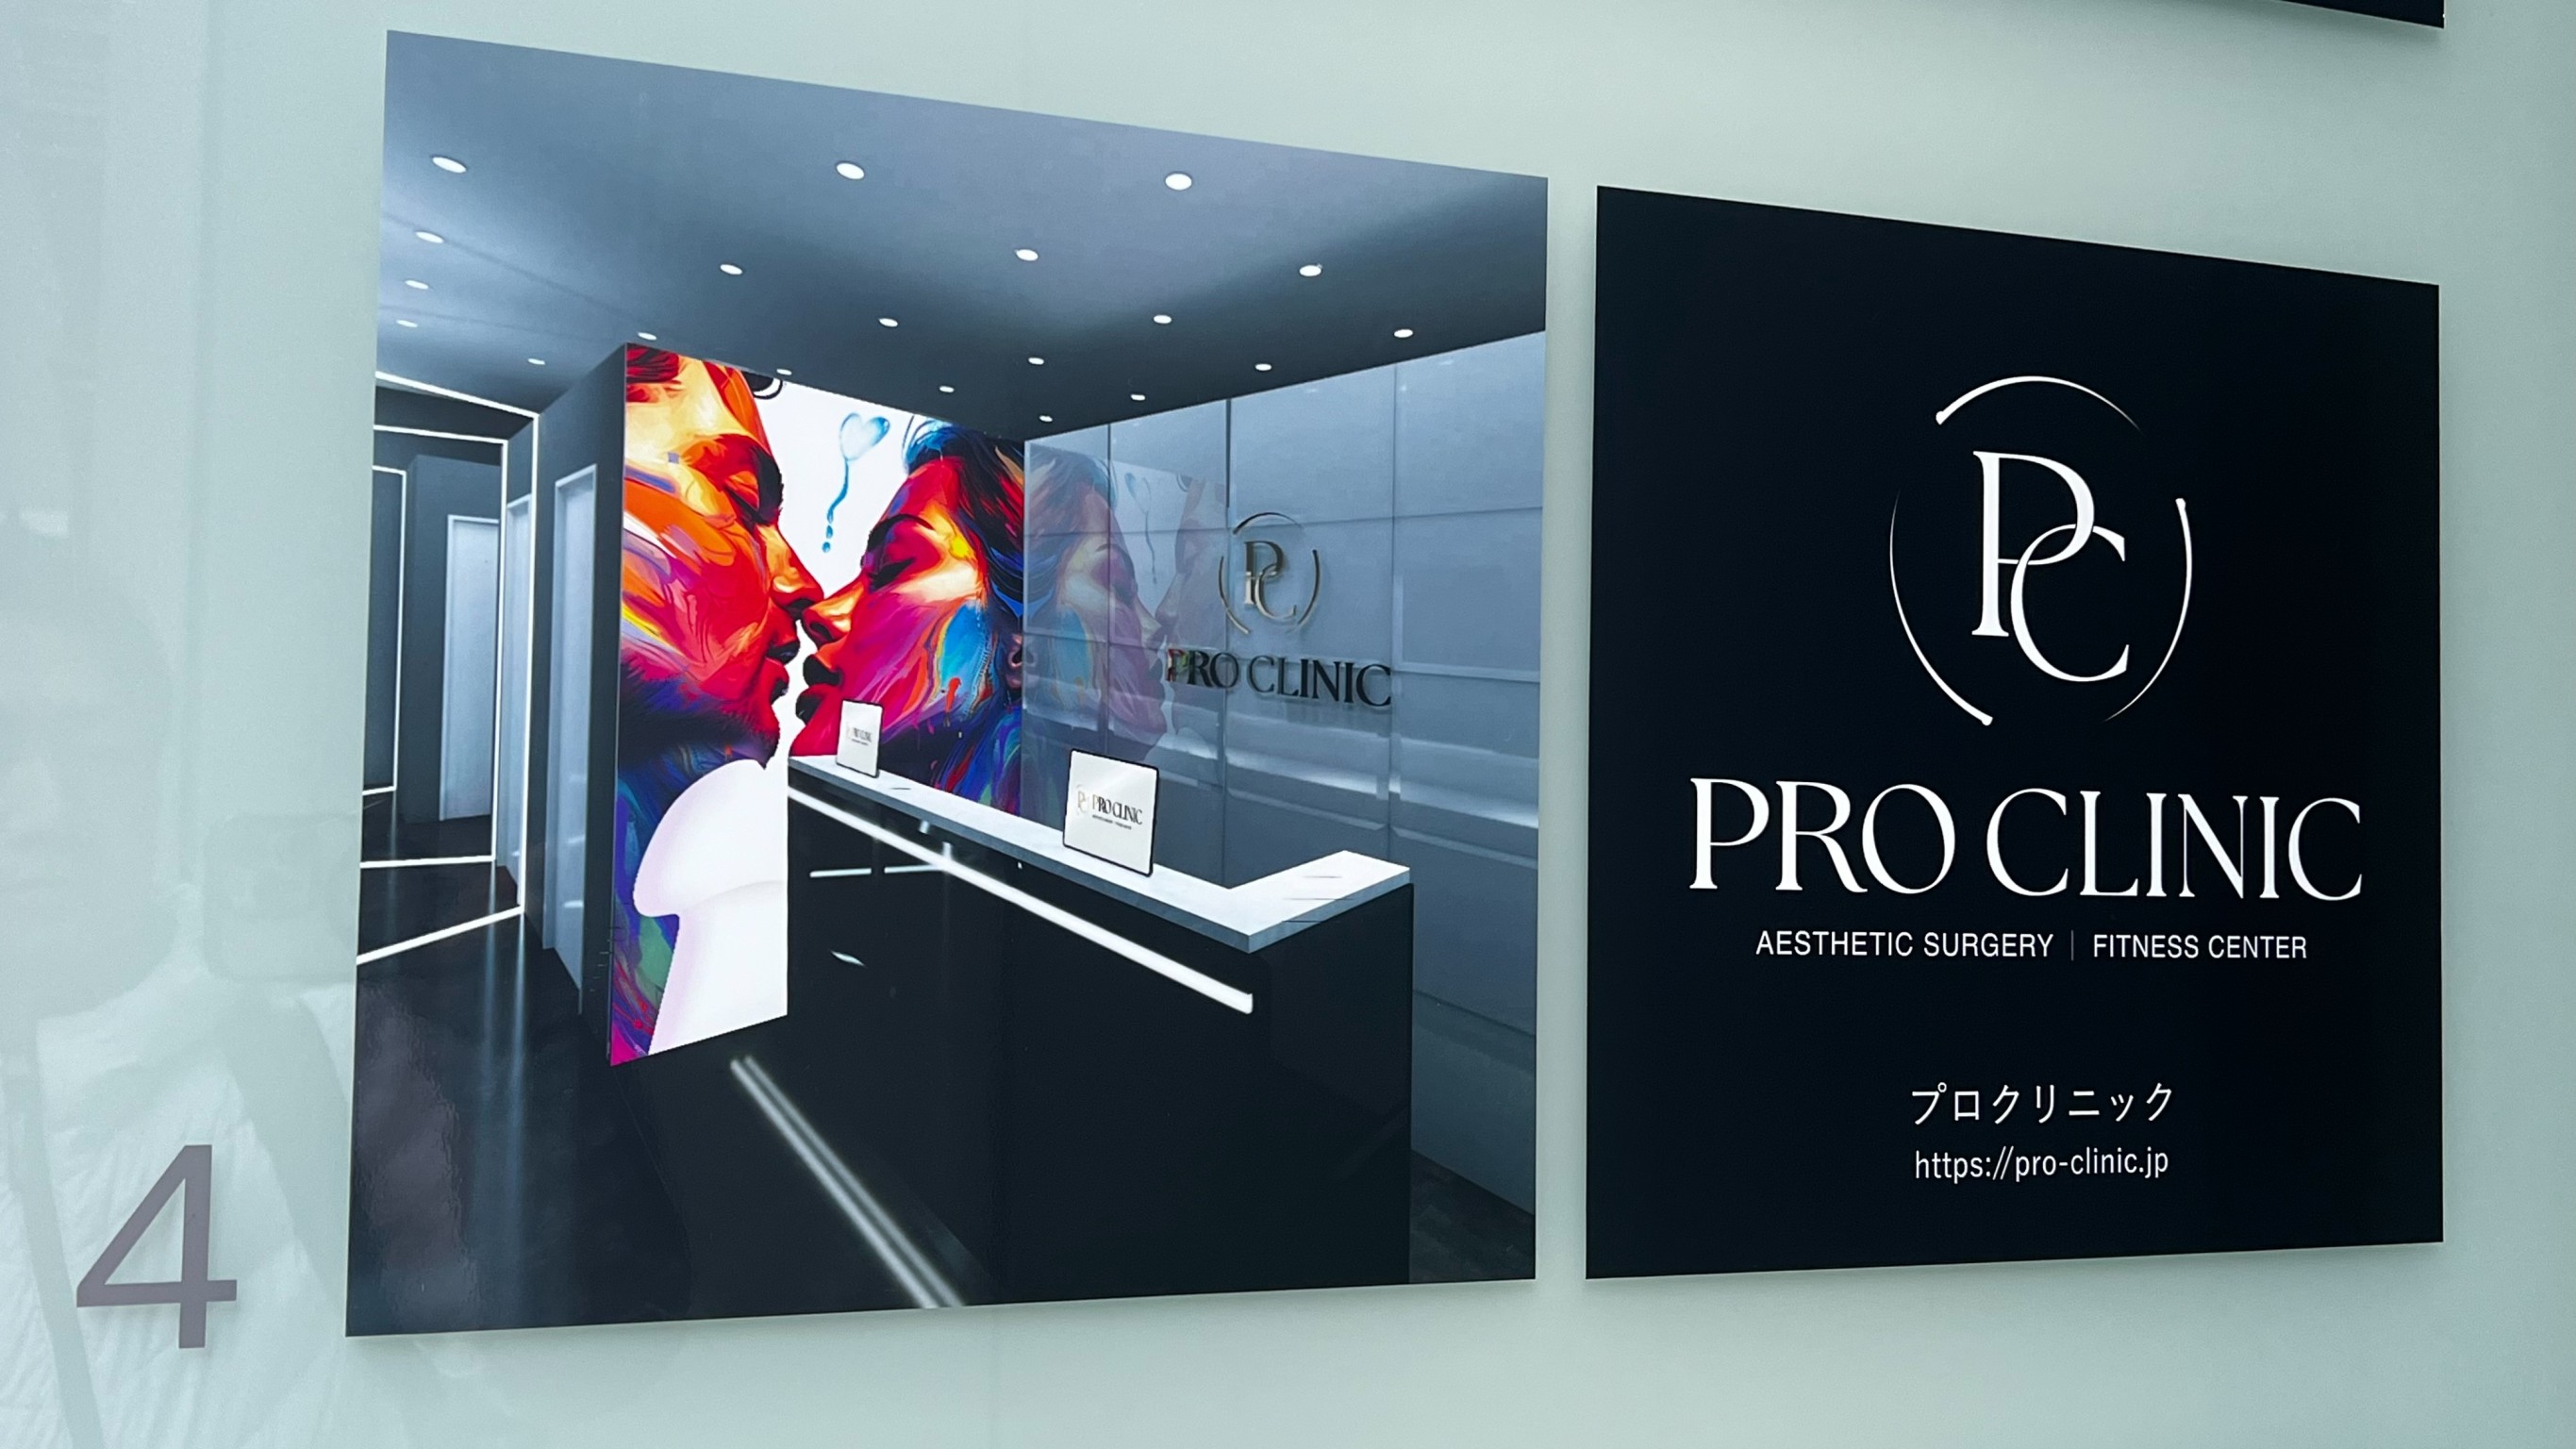 Images PRO CLINIC